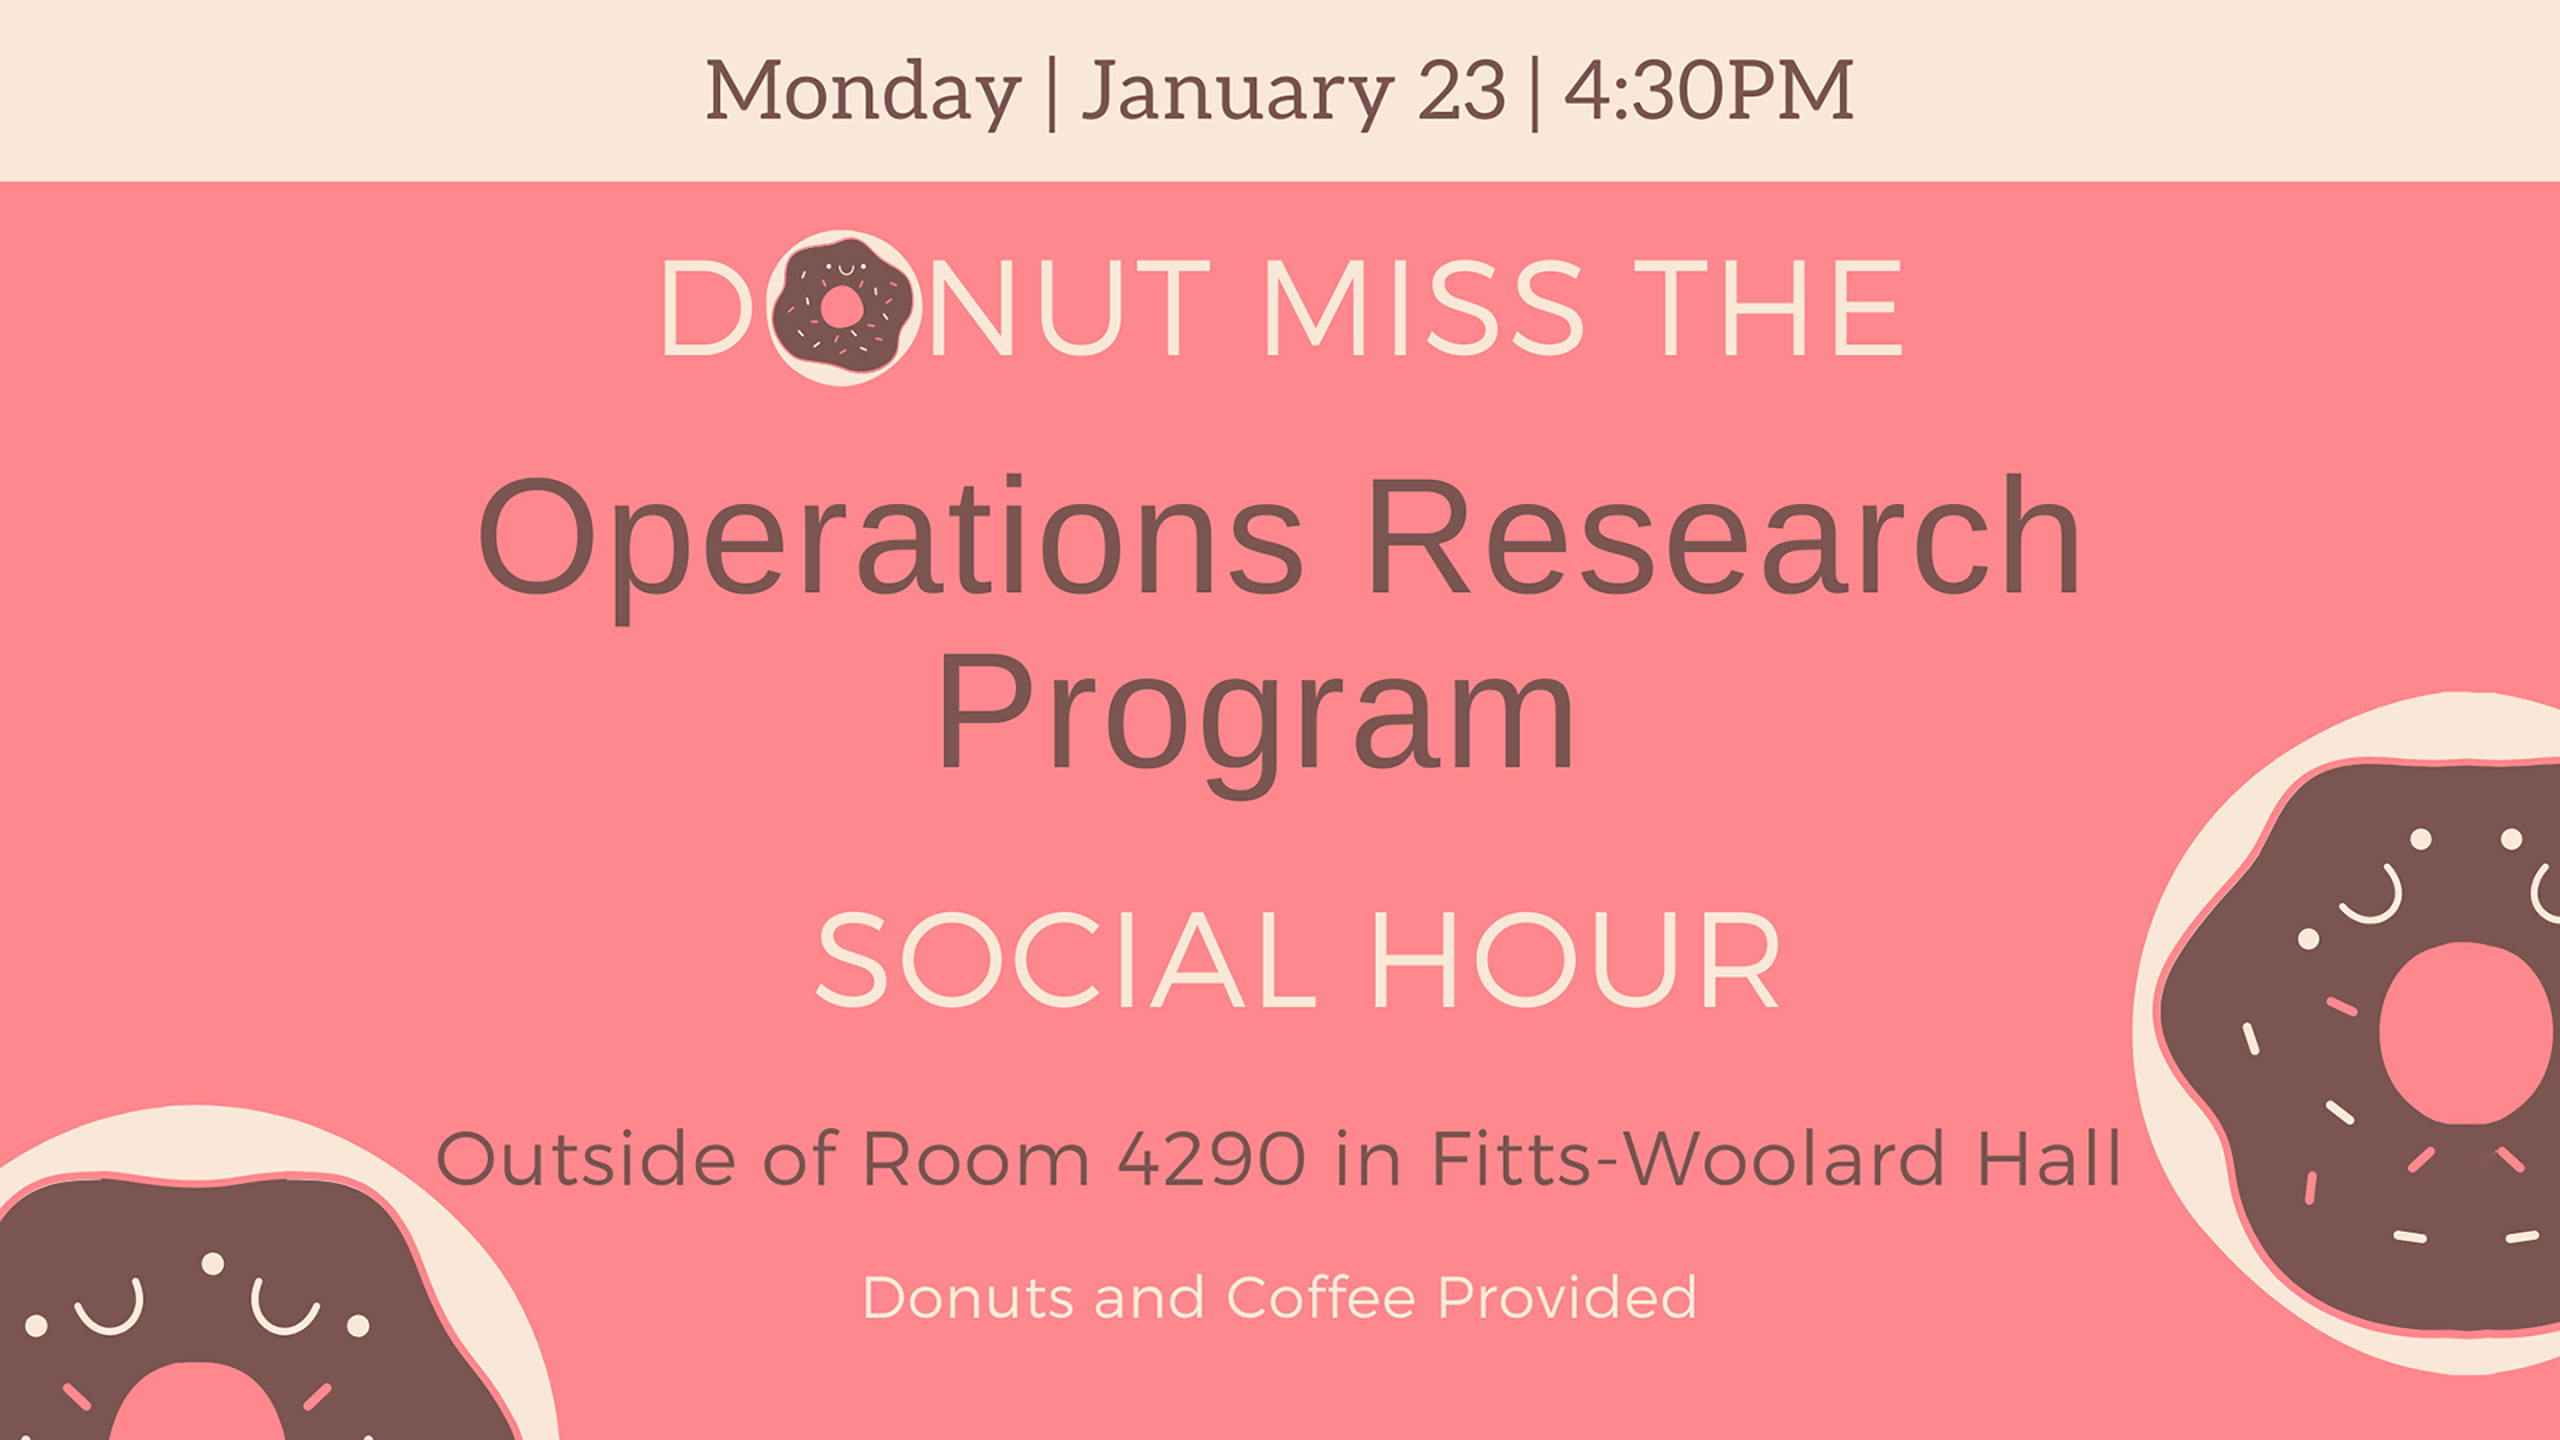 Operation Research Program Social Hour